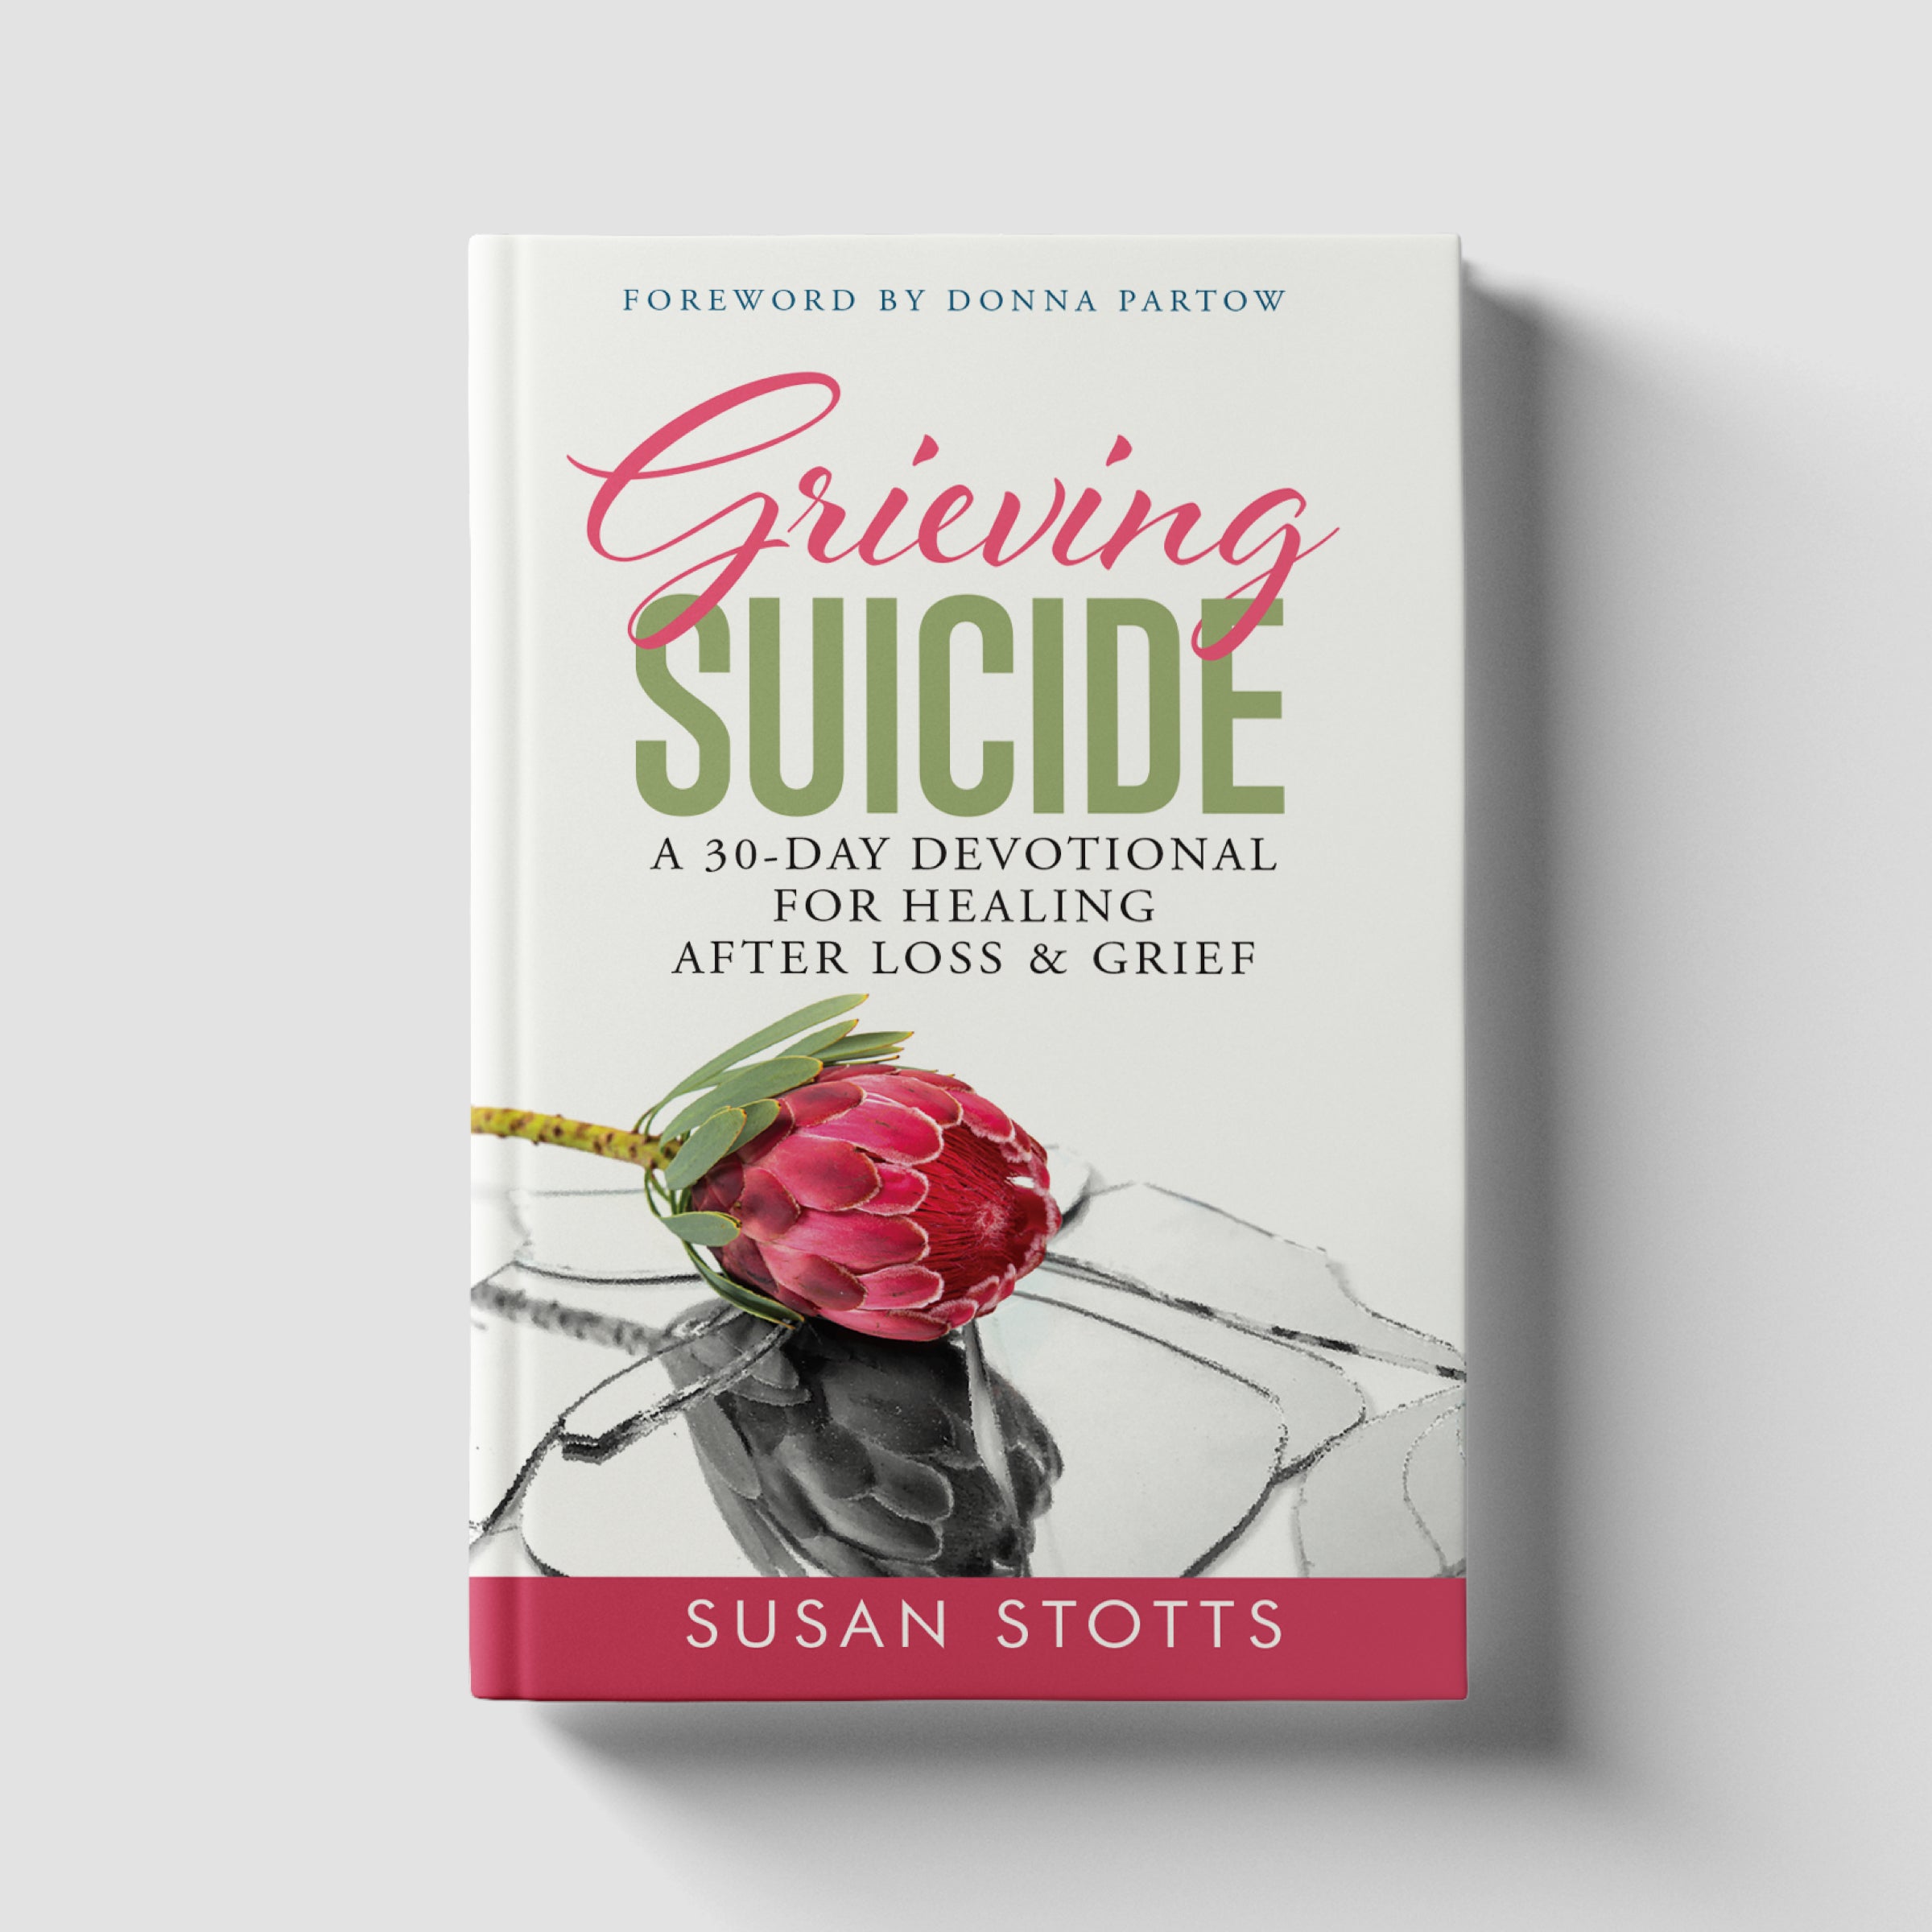 Grieving Suicide: A 30-Day Devotional for Healing After Loss and Grief